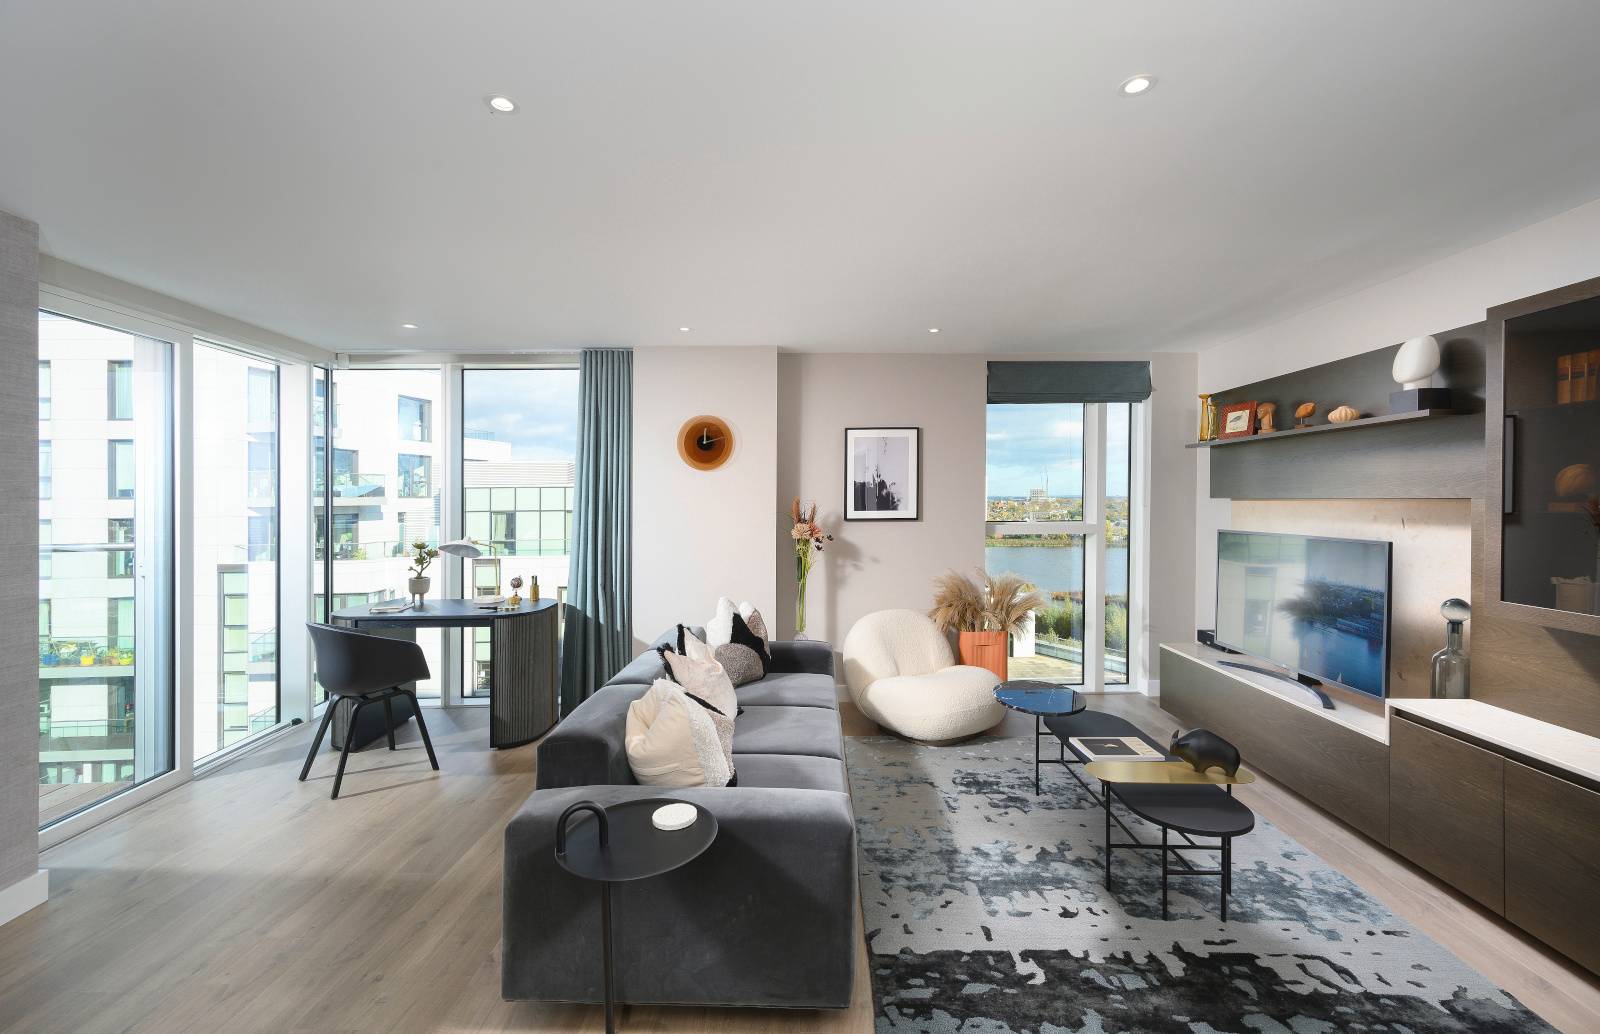 Hidden Oasis, 10 minutes from Central London -  Luxury 1-Bedroom Apartment in a Stunning New Development Surrounded by Nature - 1st Floor - Courtyard Garden Views